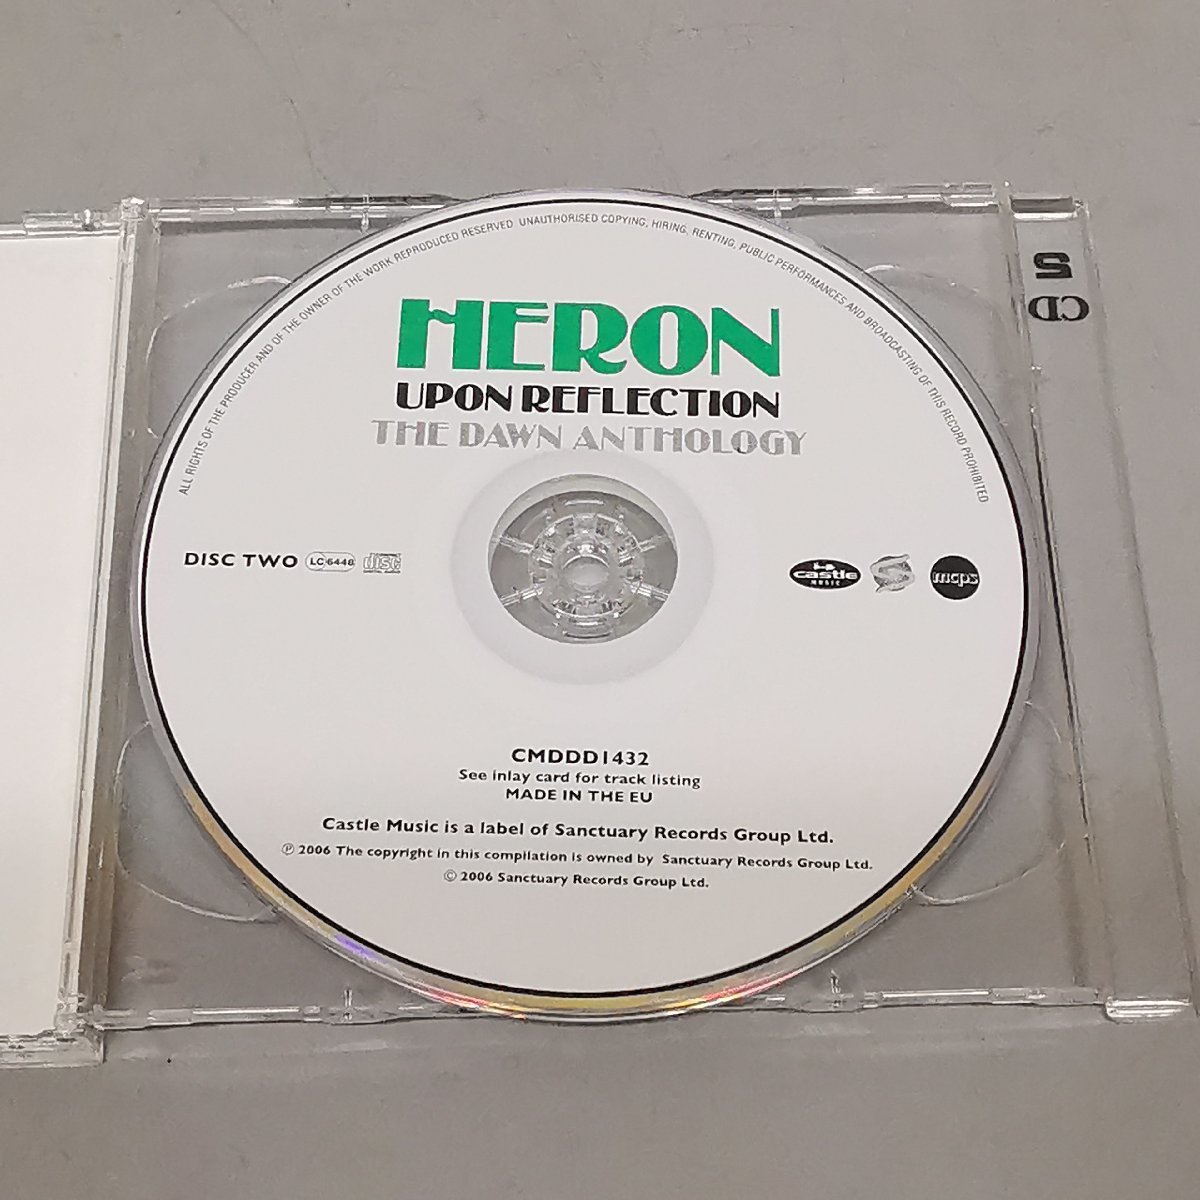 CD 2枚組 HERON / UPON REFLECTION THE DAWN ANTHOLOGY 2CD Z4710_画像3